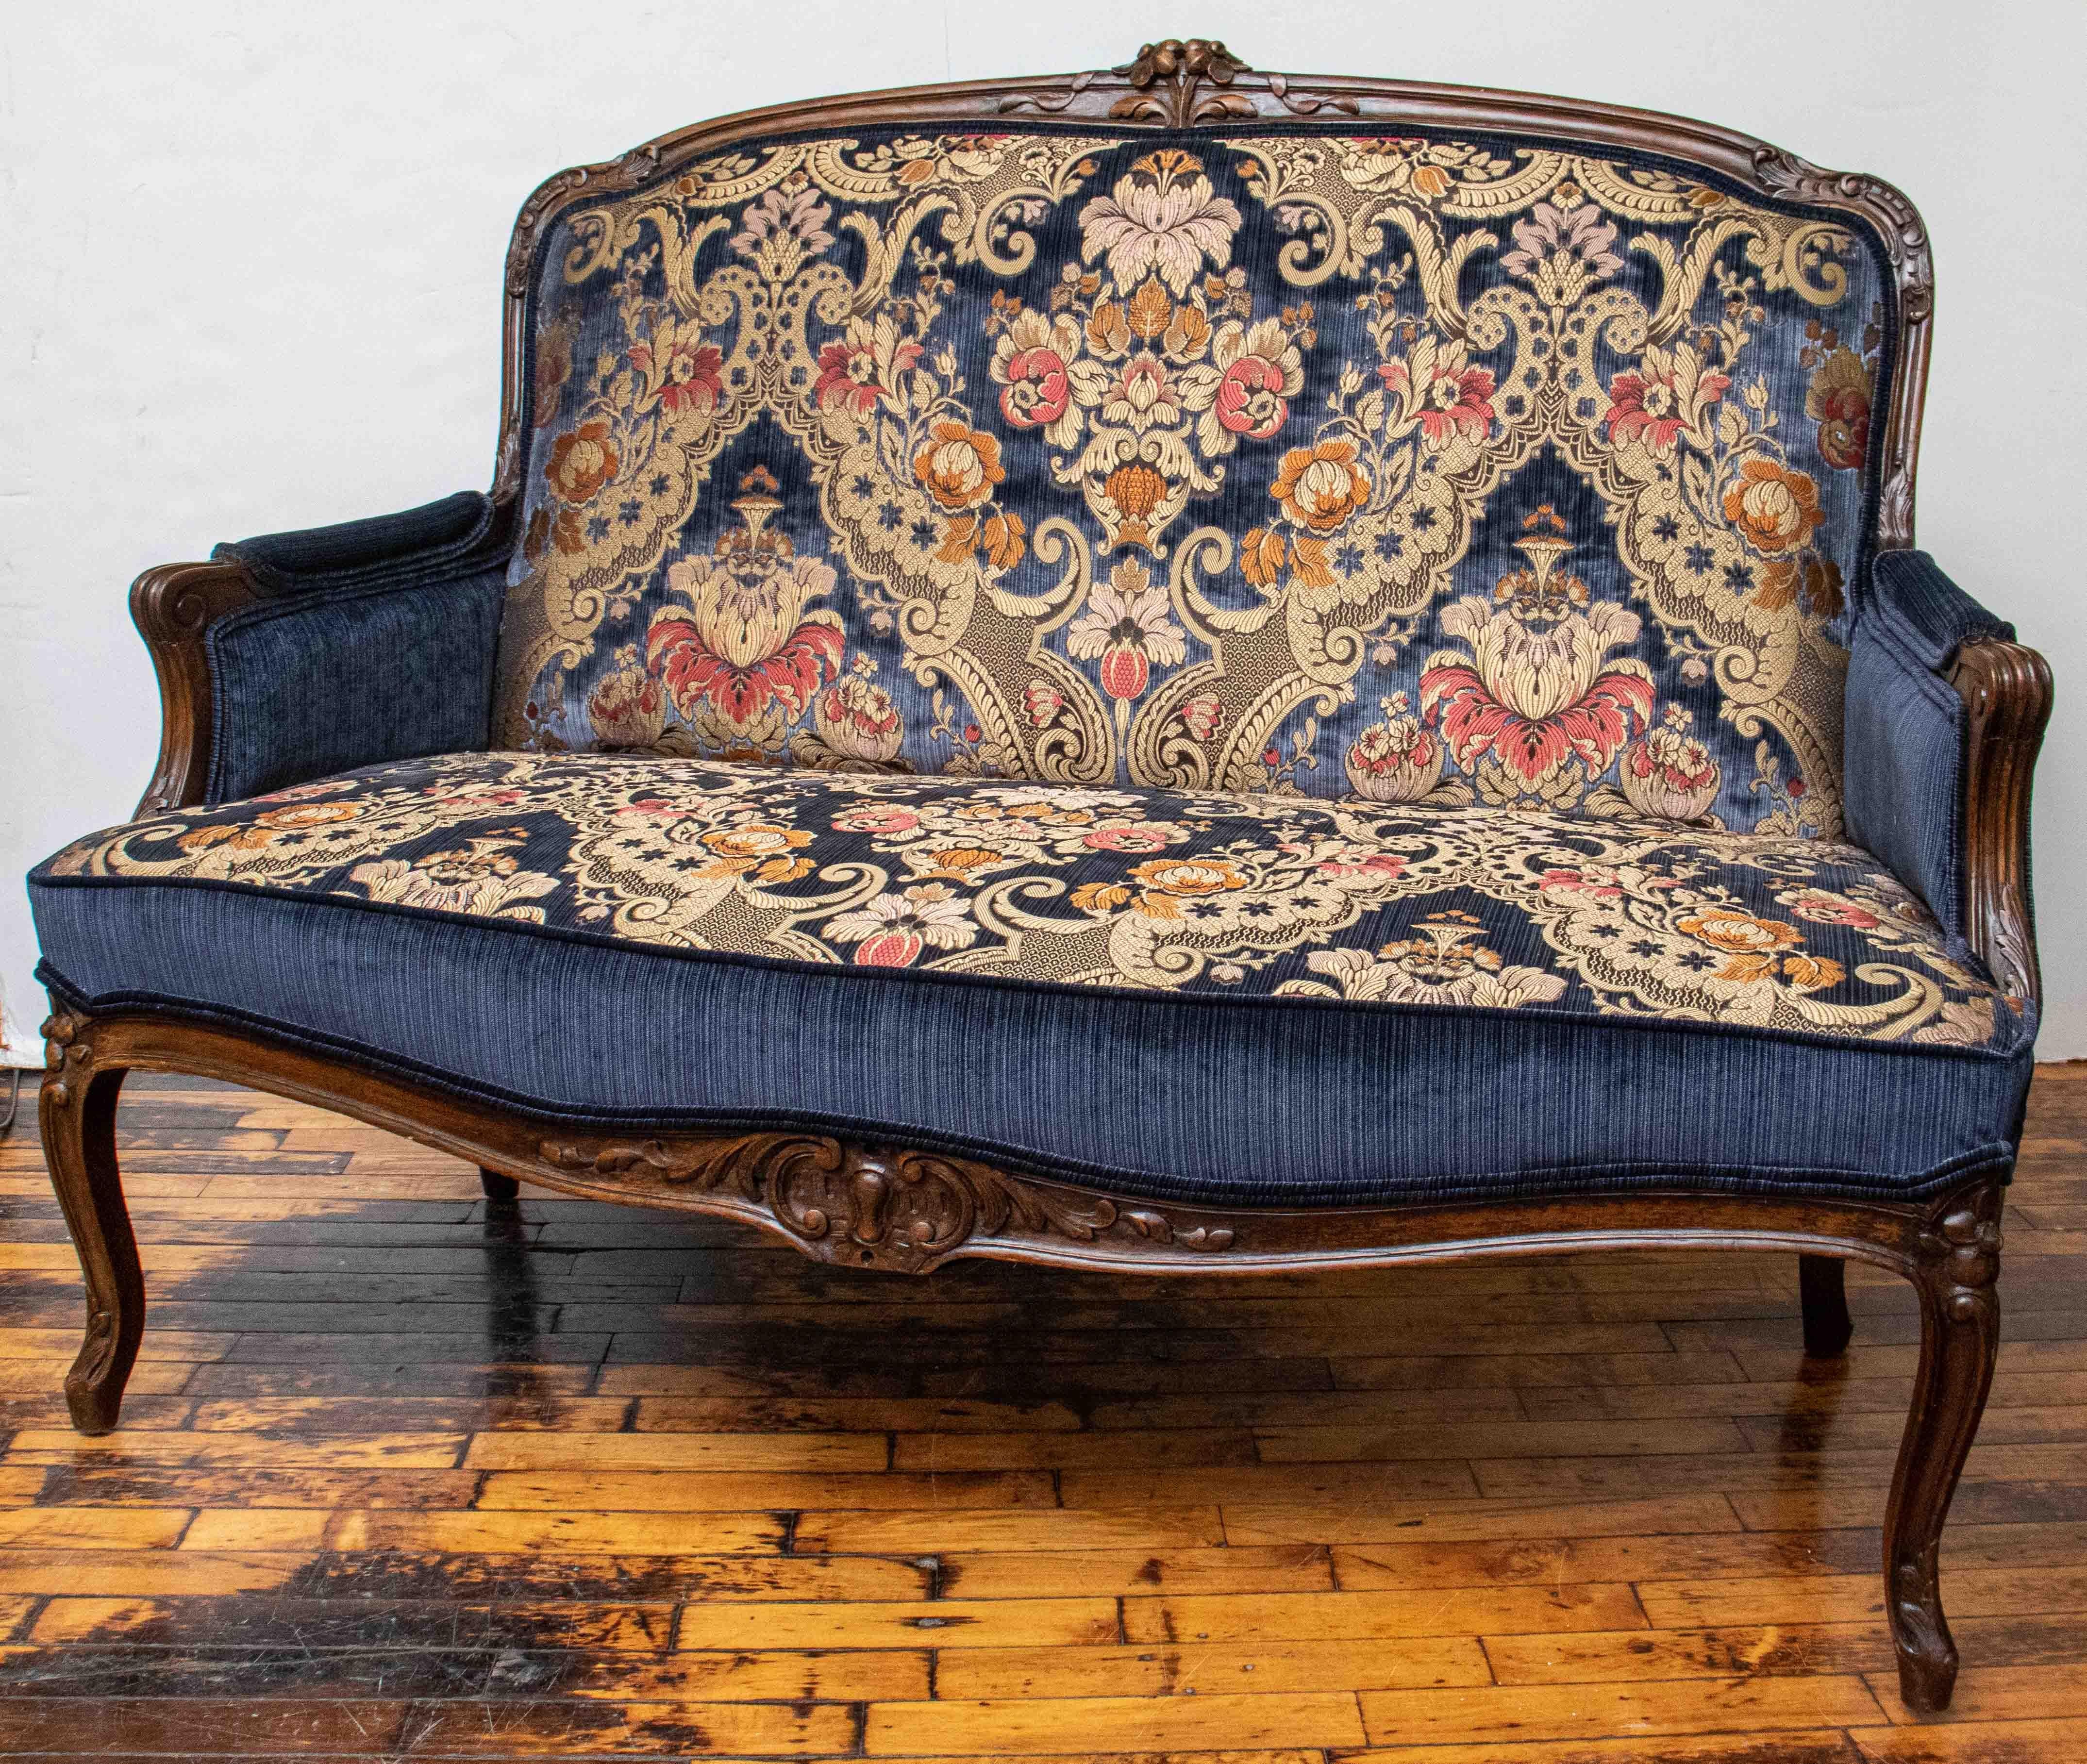 Late 19th Century Antique French Settee with Scalamandre Upholstery